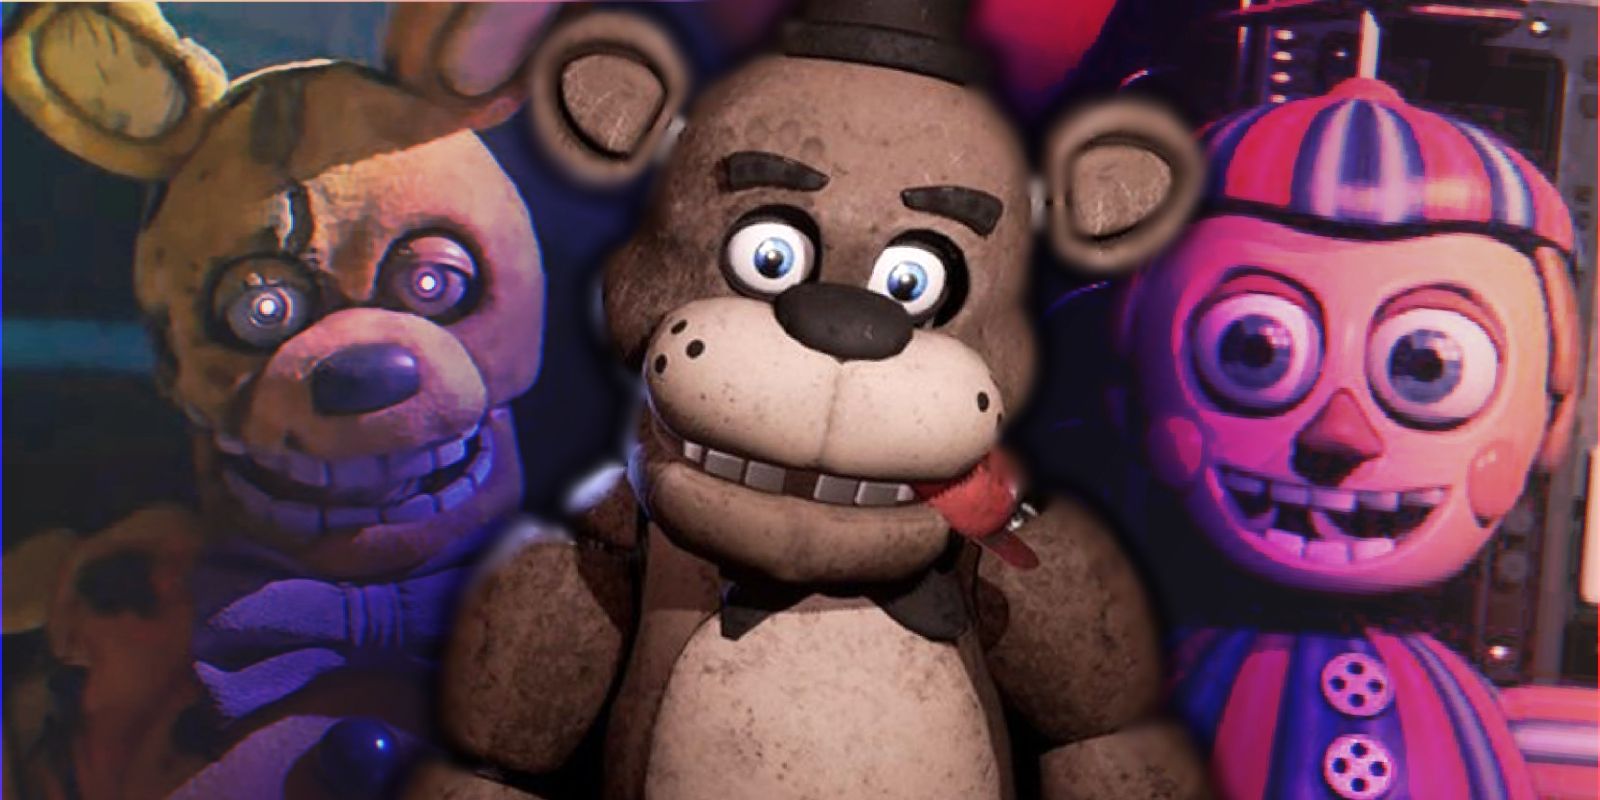 Is there an end-credit scene in the FNAF movie? Explained